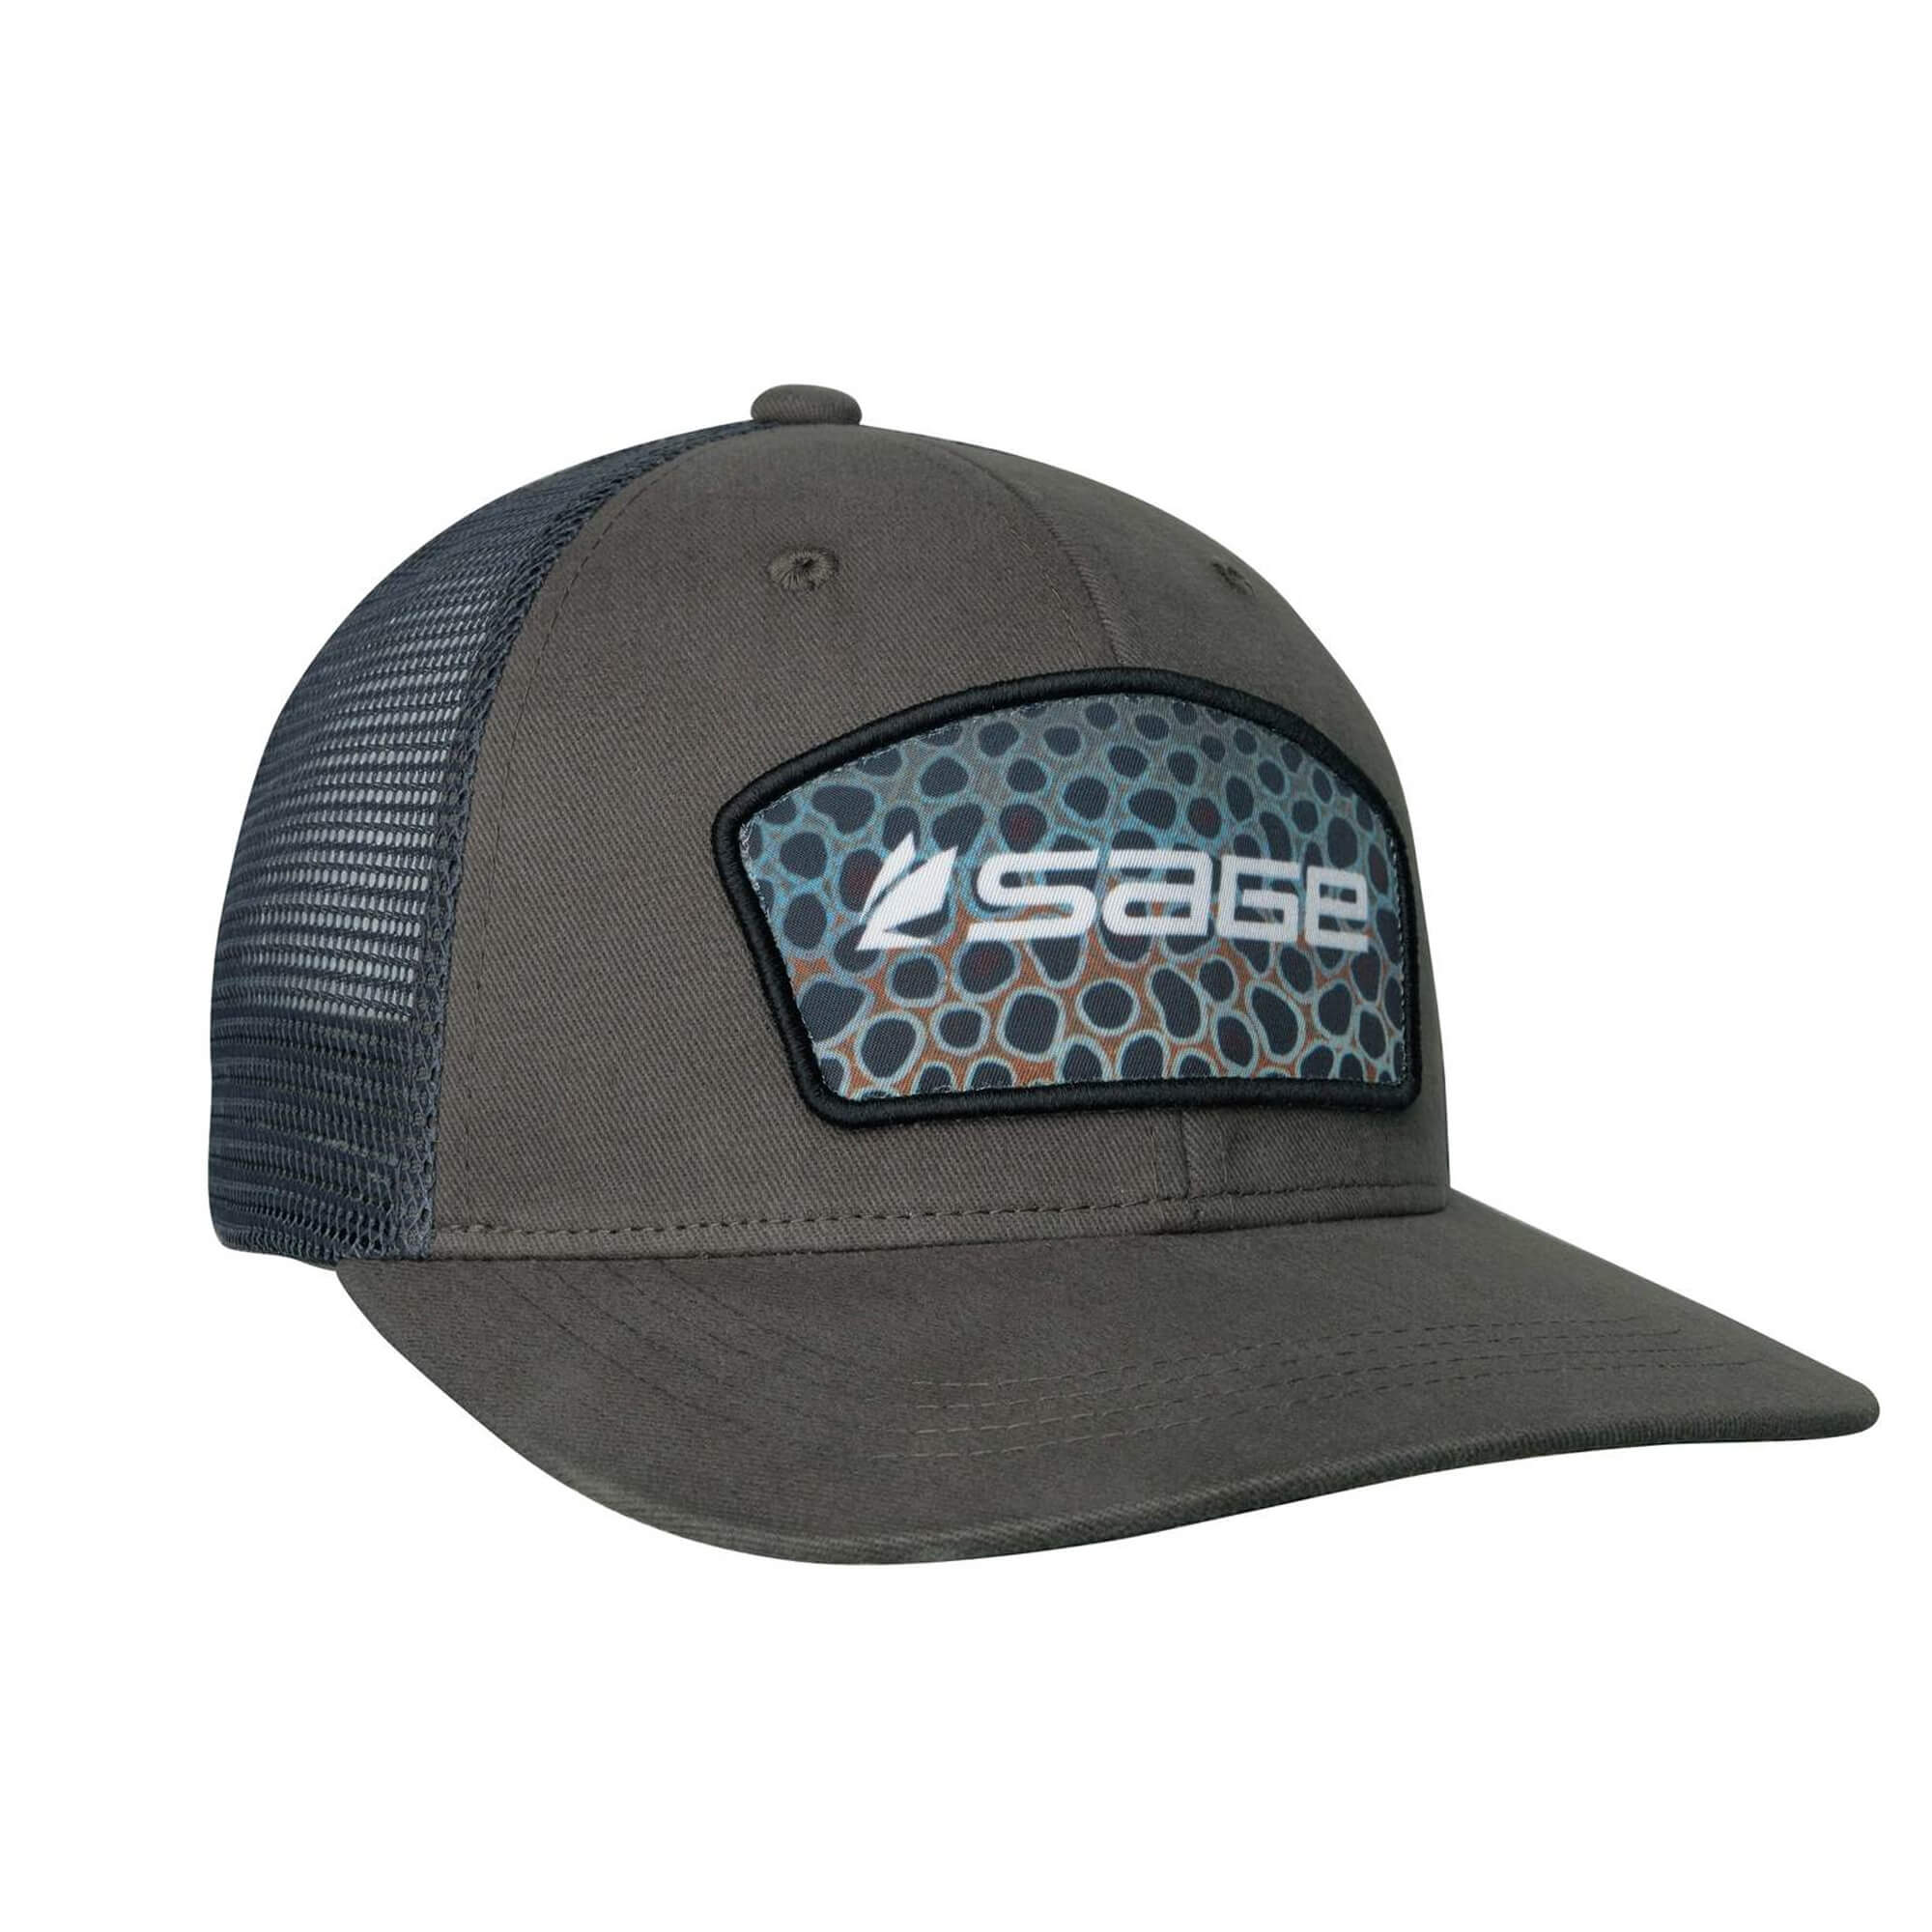 Sage Patch Trucker Cap – Brown Trout – Guide Flyfishing, Fly Fishing Rods,  Reels, Sage, Redington, RIO